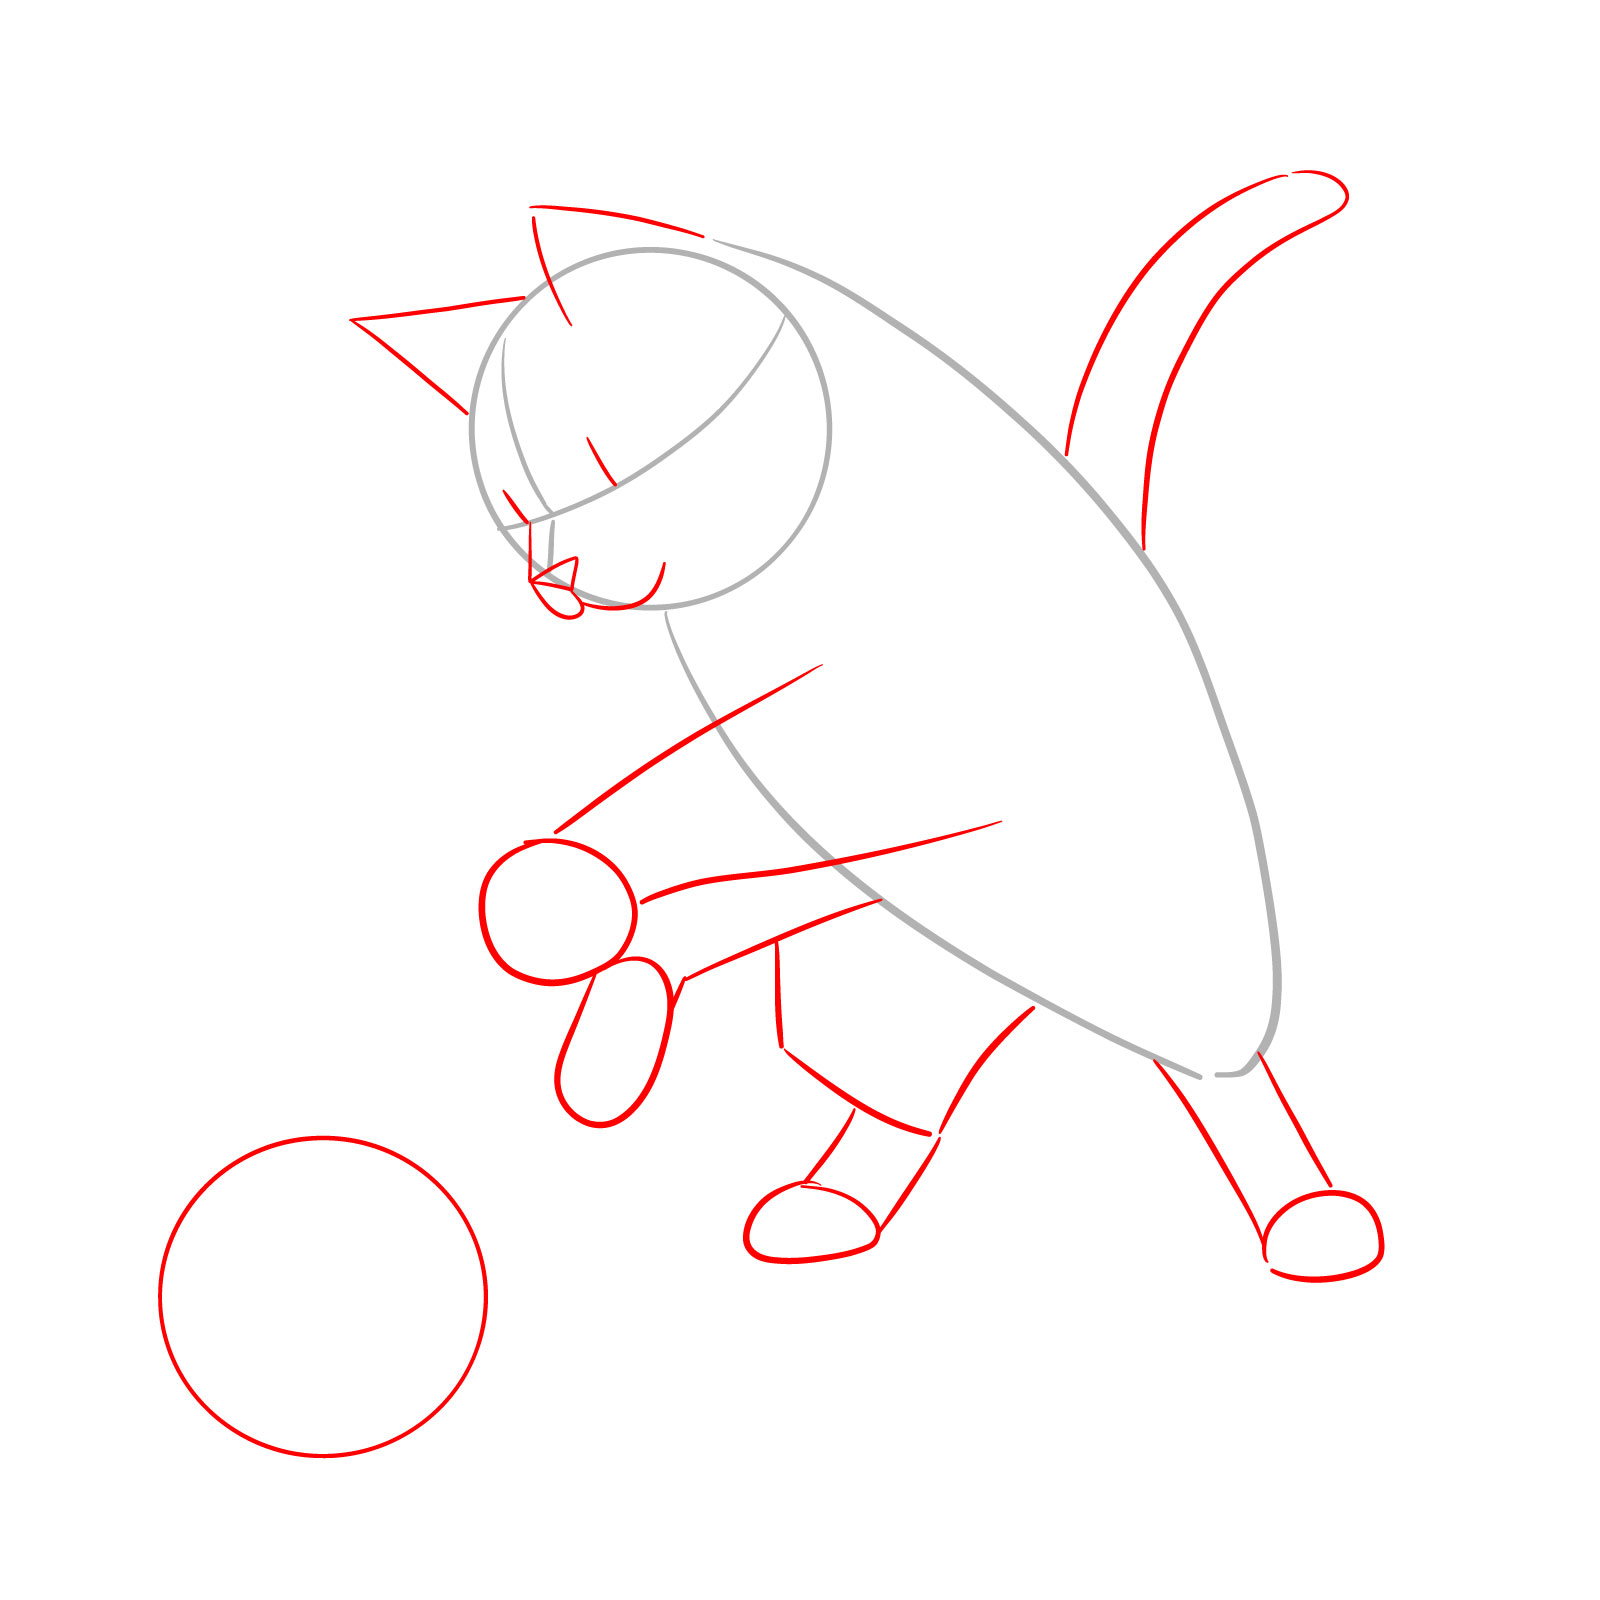 Drawing the foundational shapes for a cat's facial features, ears, limbs, and a ball - step 02